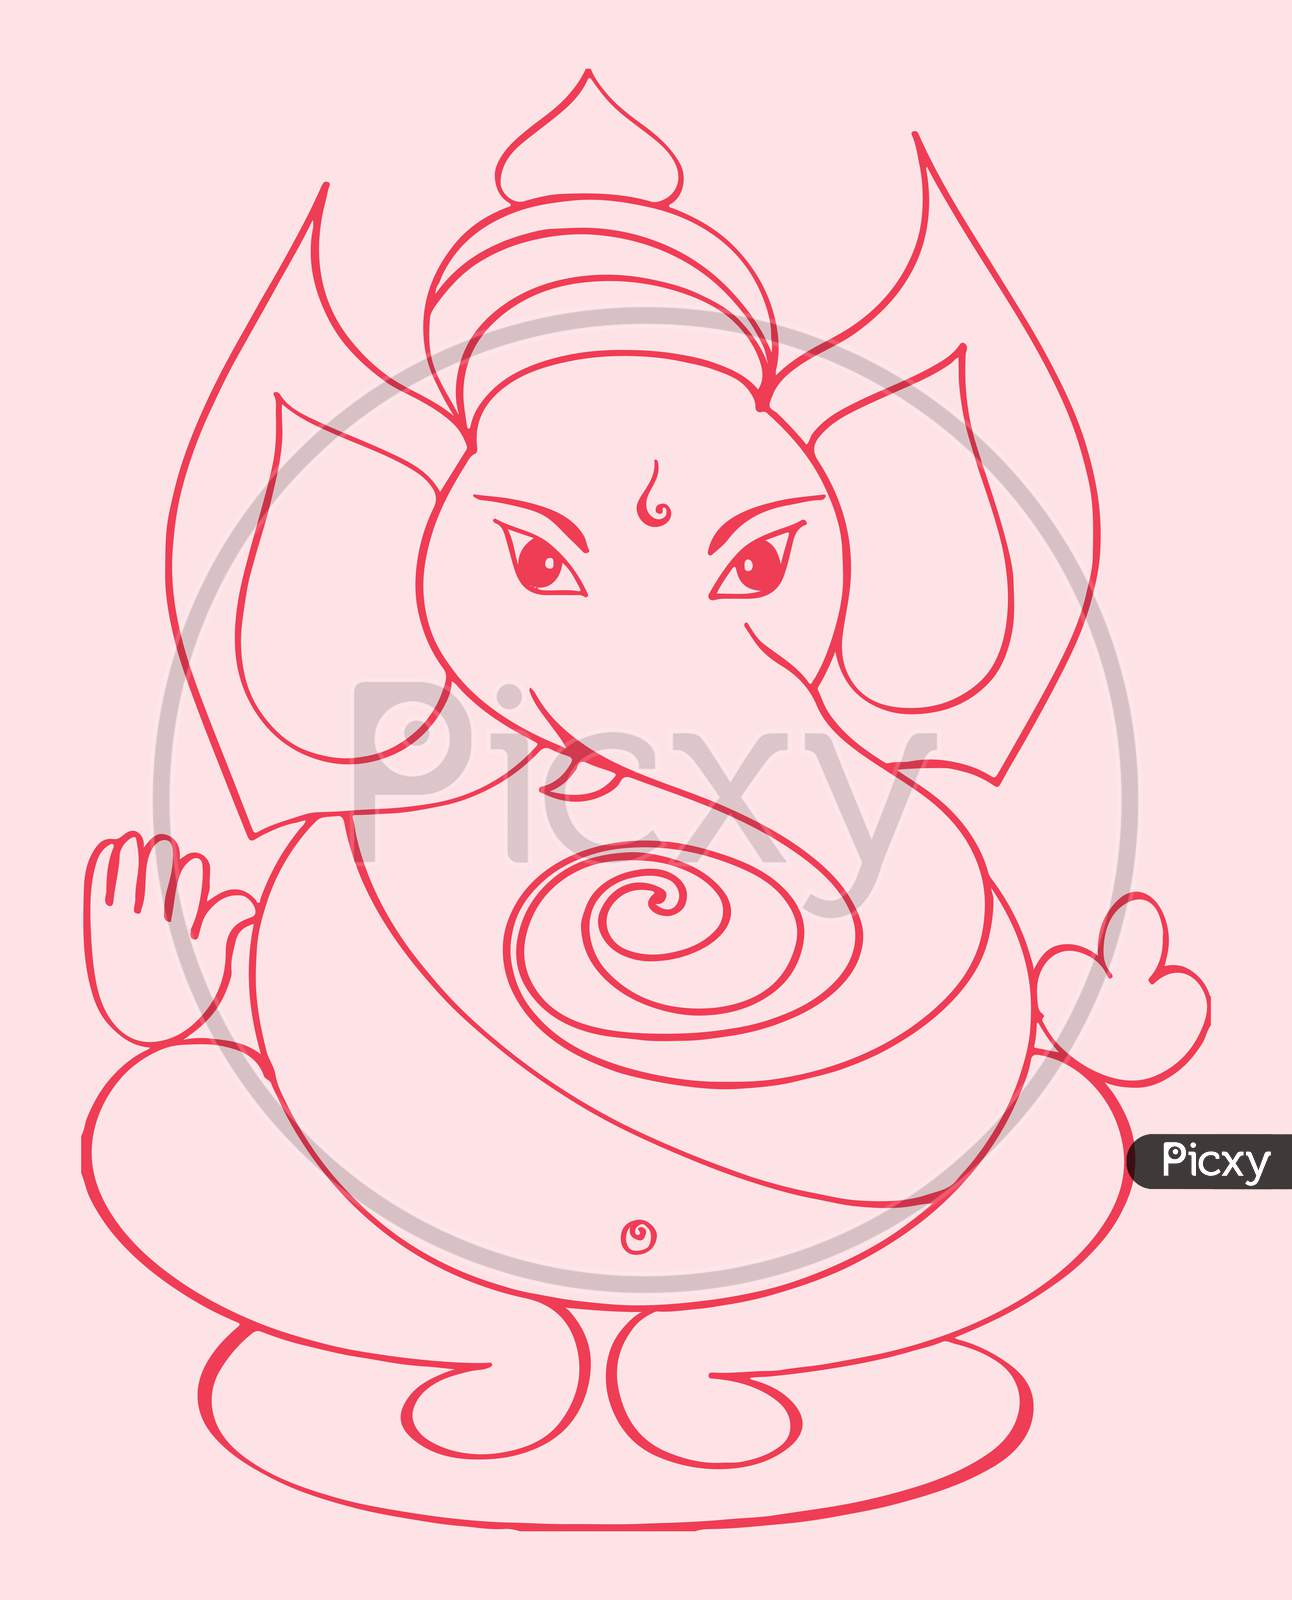 Lord Ganesha Drawings for Sale - Pixels